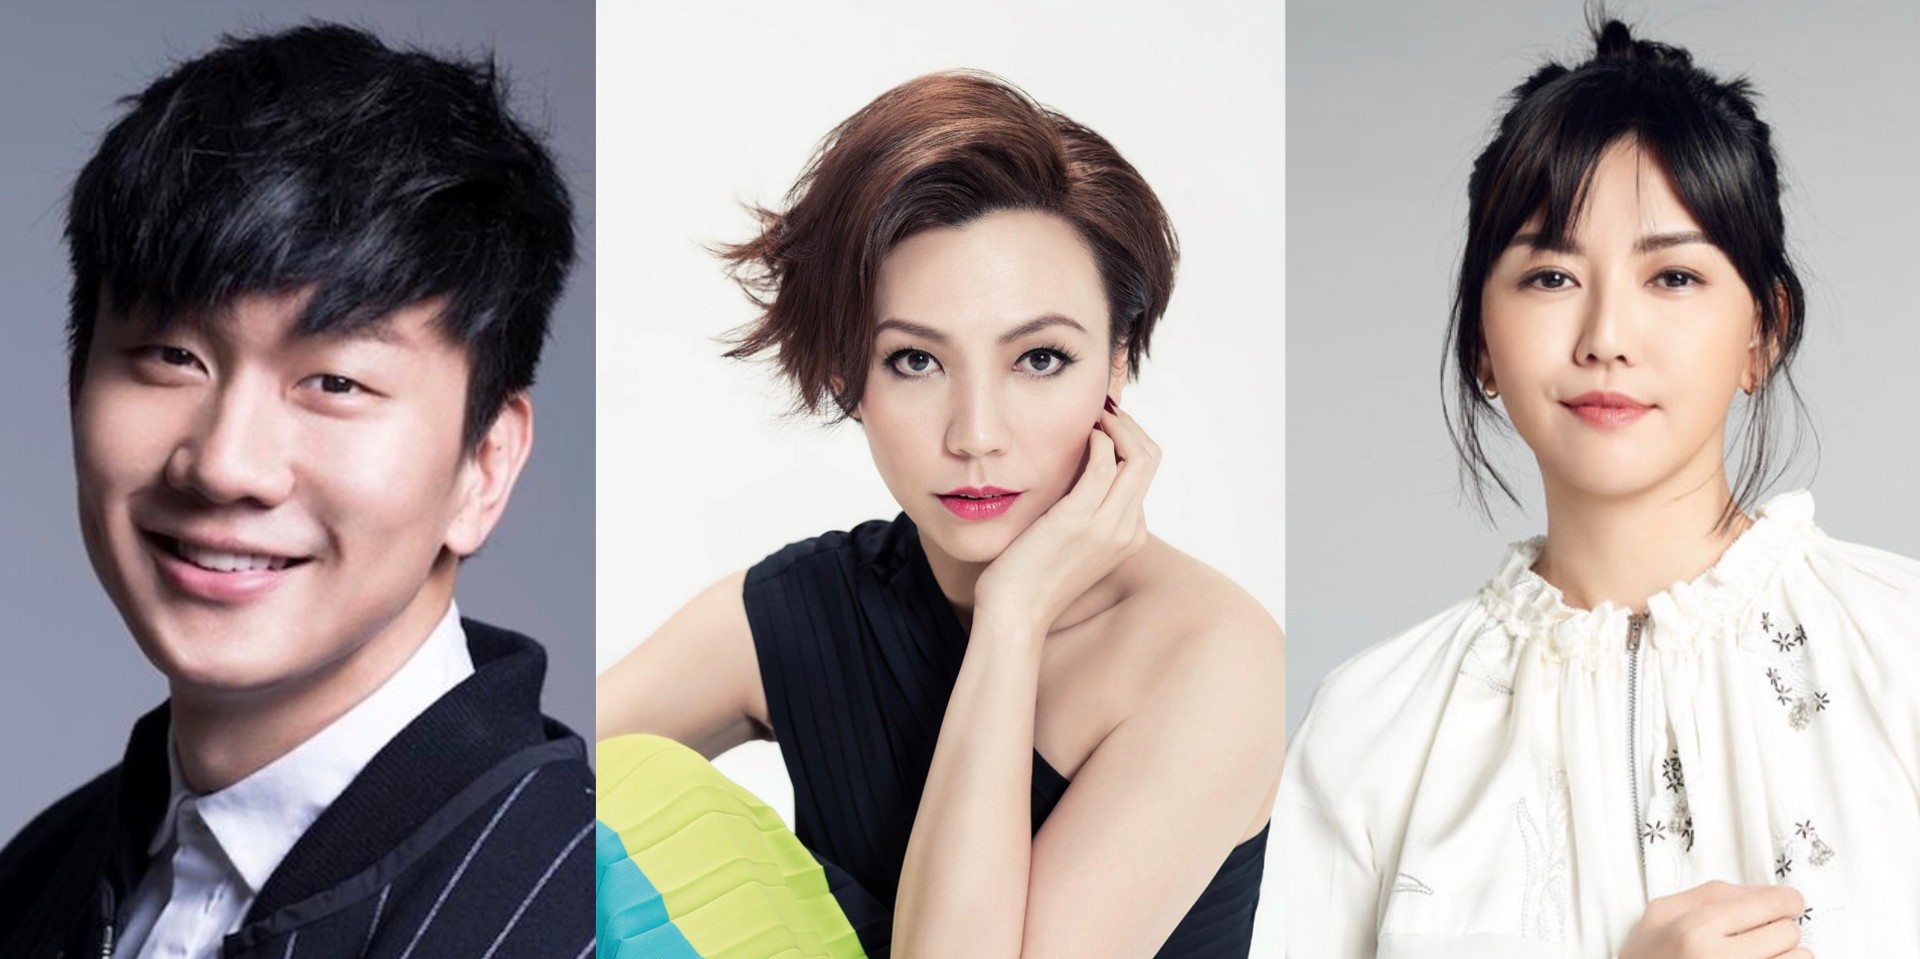 Celebrate Mother's Day with JJ Lin, Stefanie Sun and Kit Chan in a livestream concert by Families For Life - watch